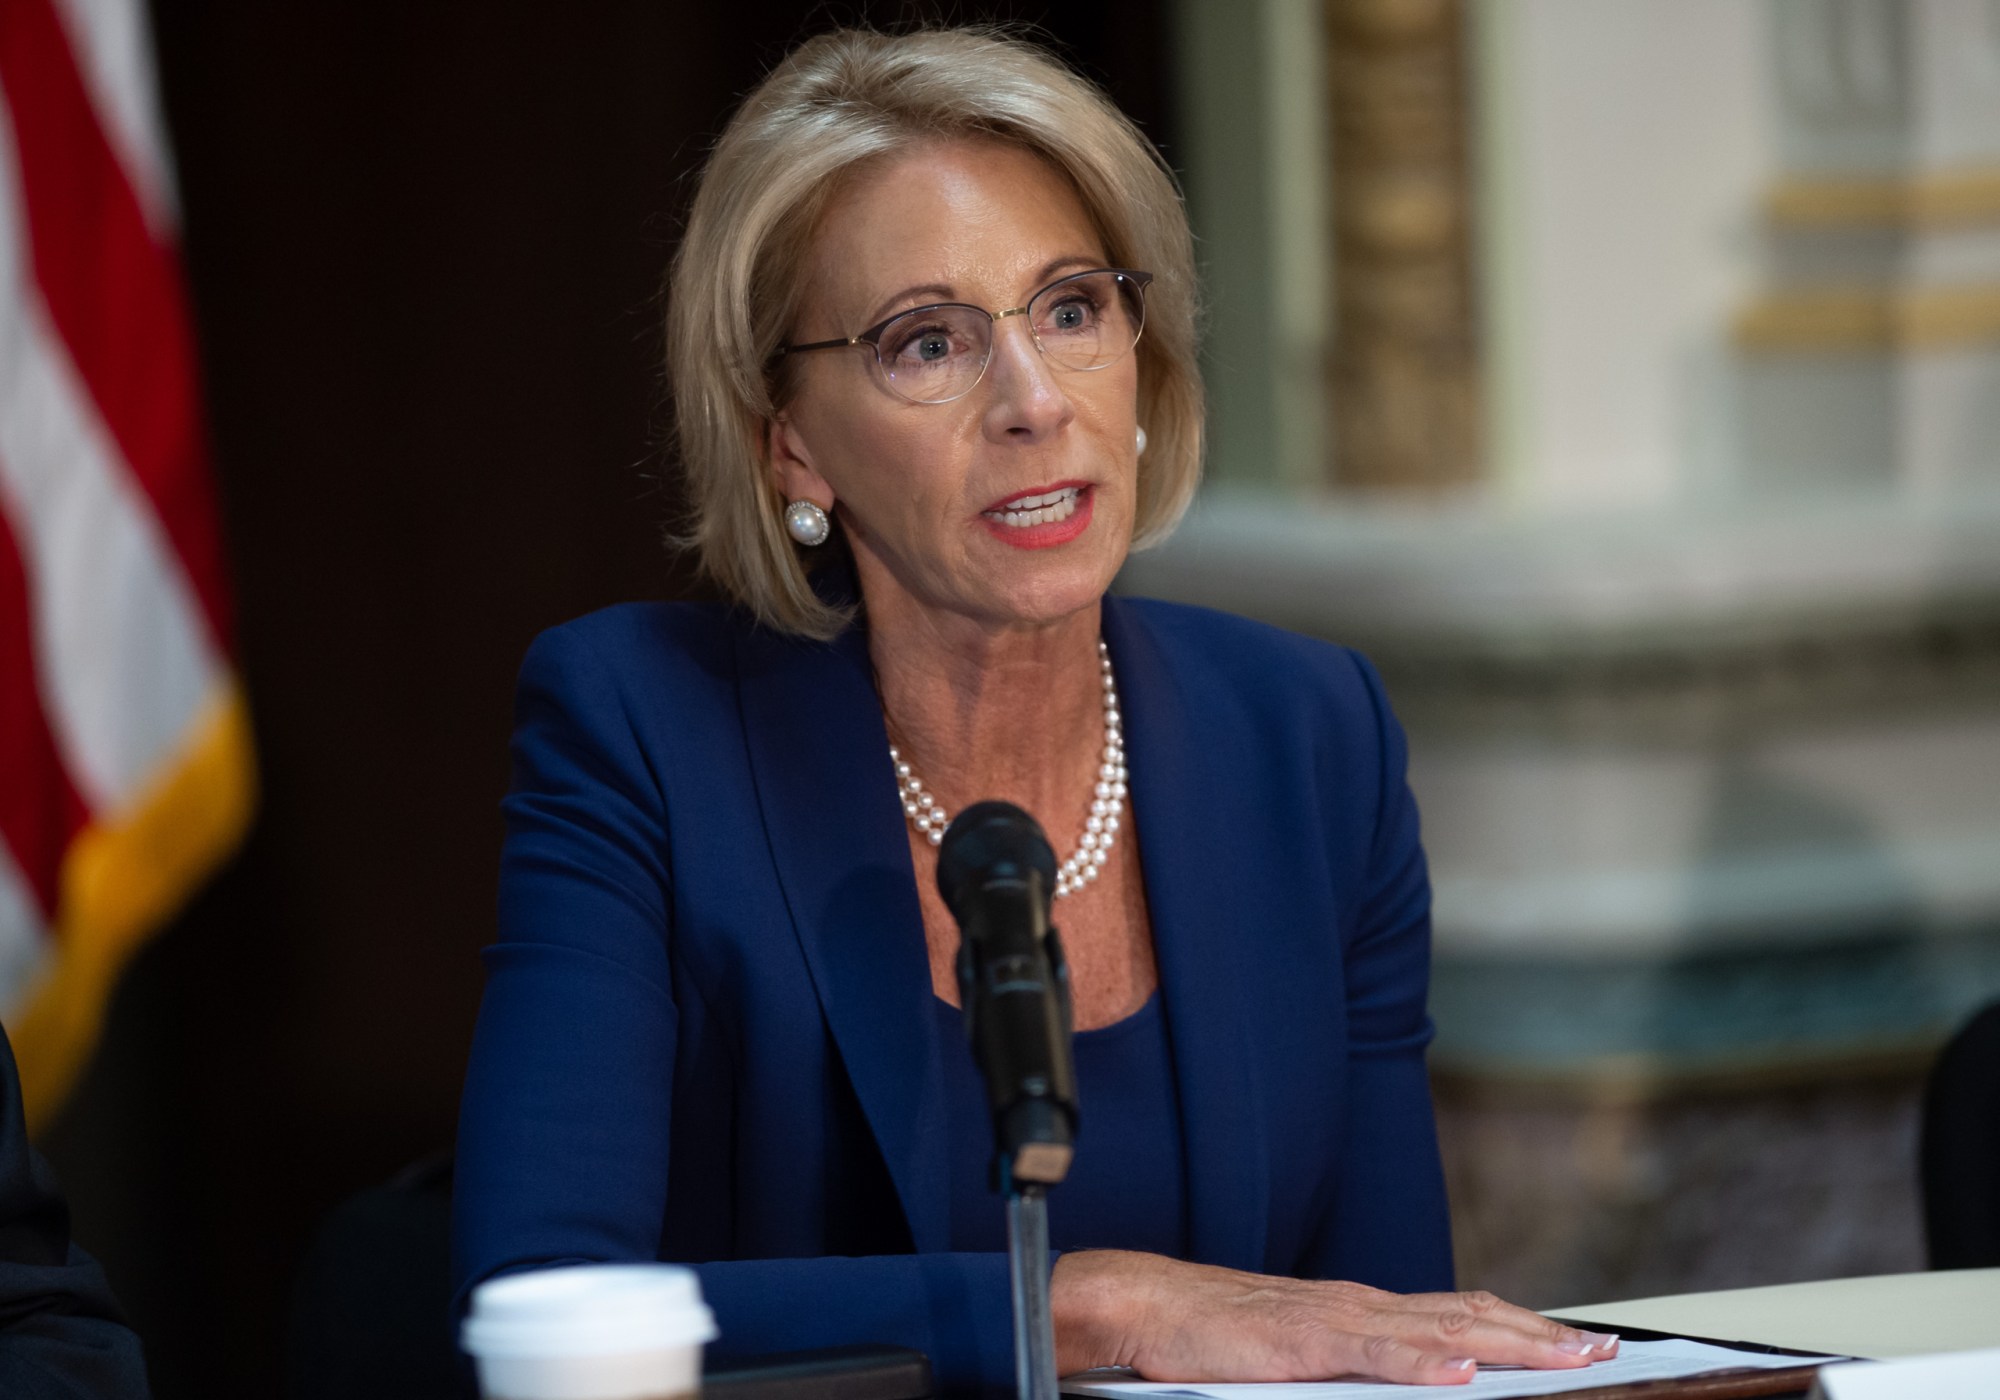 U.S. Secretary of Education Betsy DeVos speaks during the fifth meeting of the Federal Commission on School Safety on August 16, 2018. (Getty/Saul Loeb)